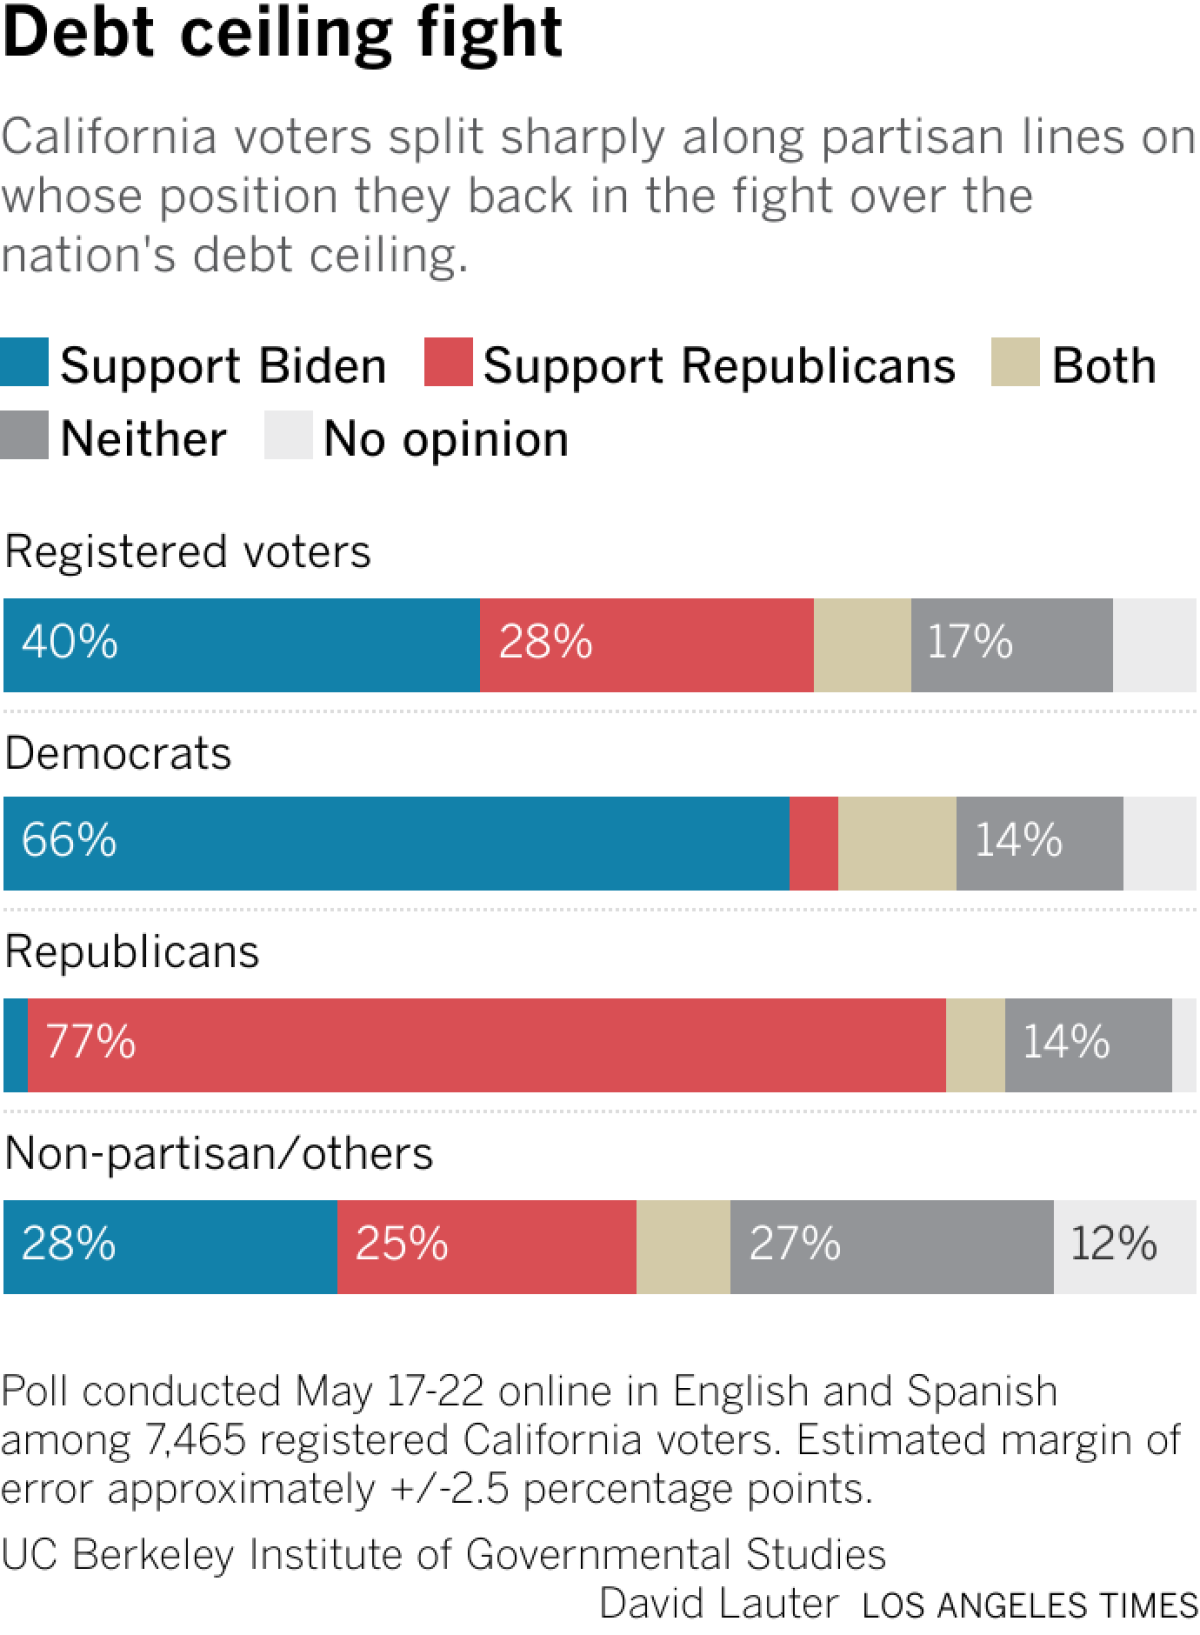 Bars show how opinion breaks down among all registered voters, Democrats, Republicans and Non-partisans.